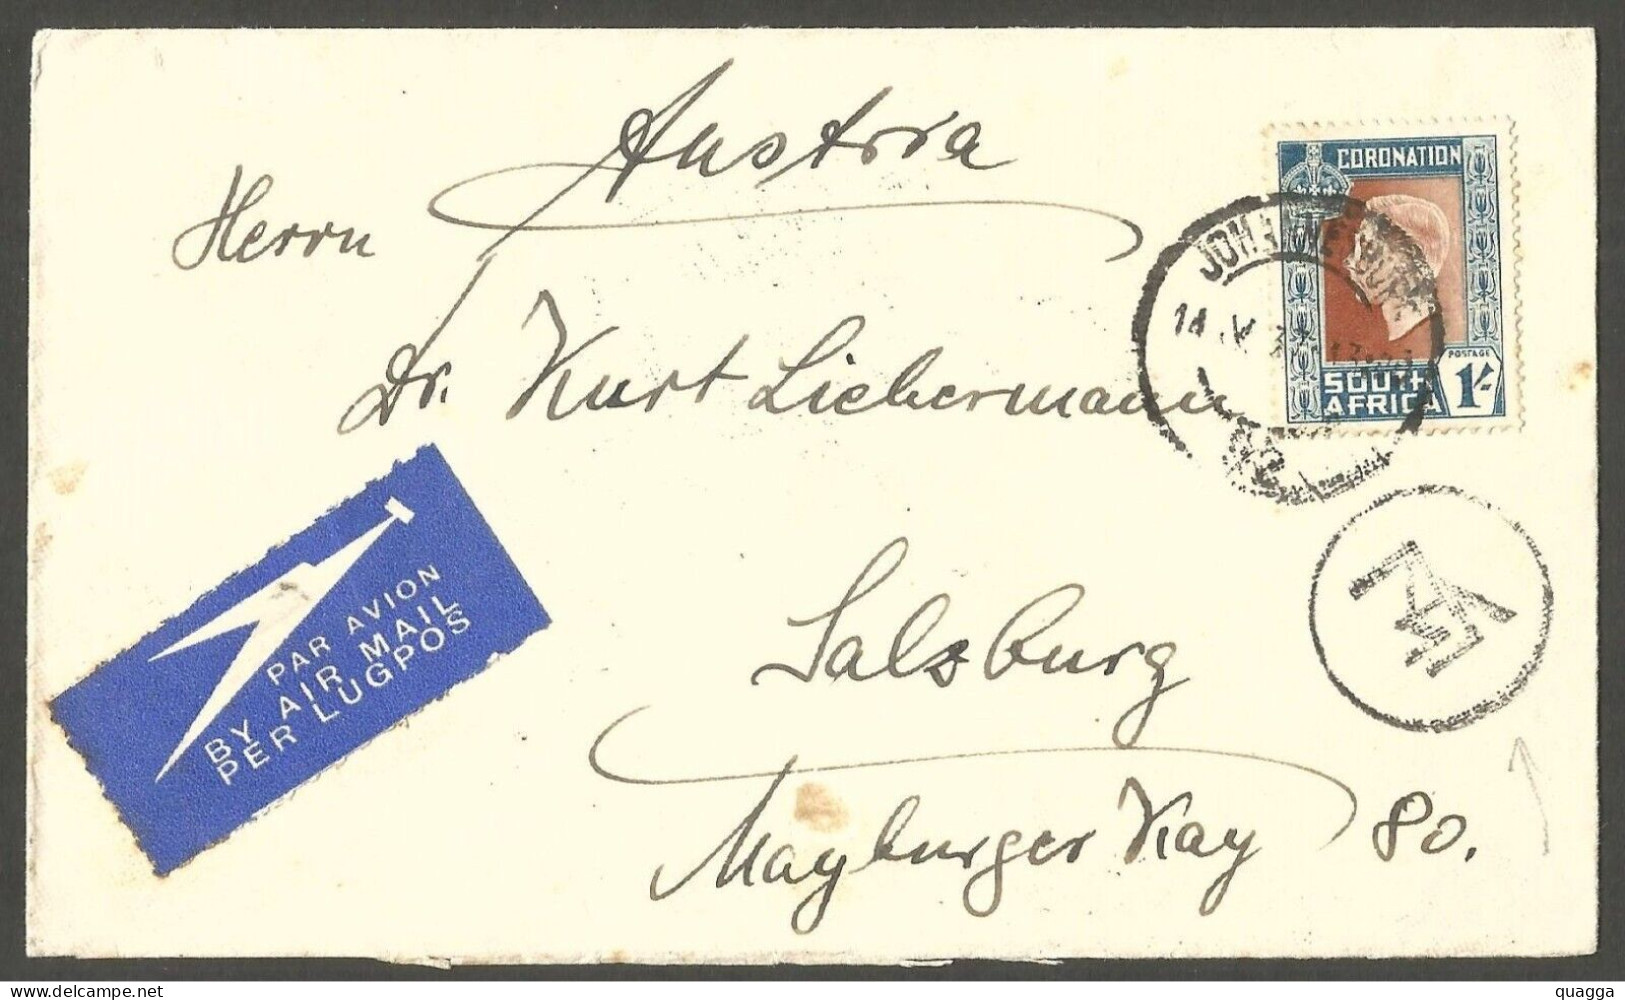 South Africa 1937. Airmail To Salzburg, Austria. Greek Exchange Control Strike. - Covers & Documents